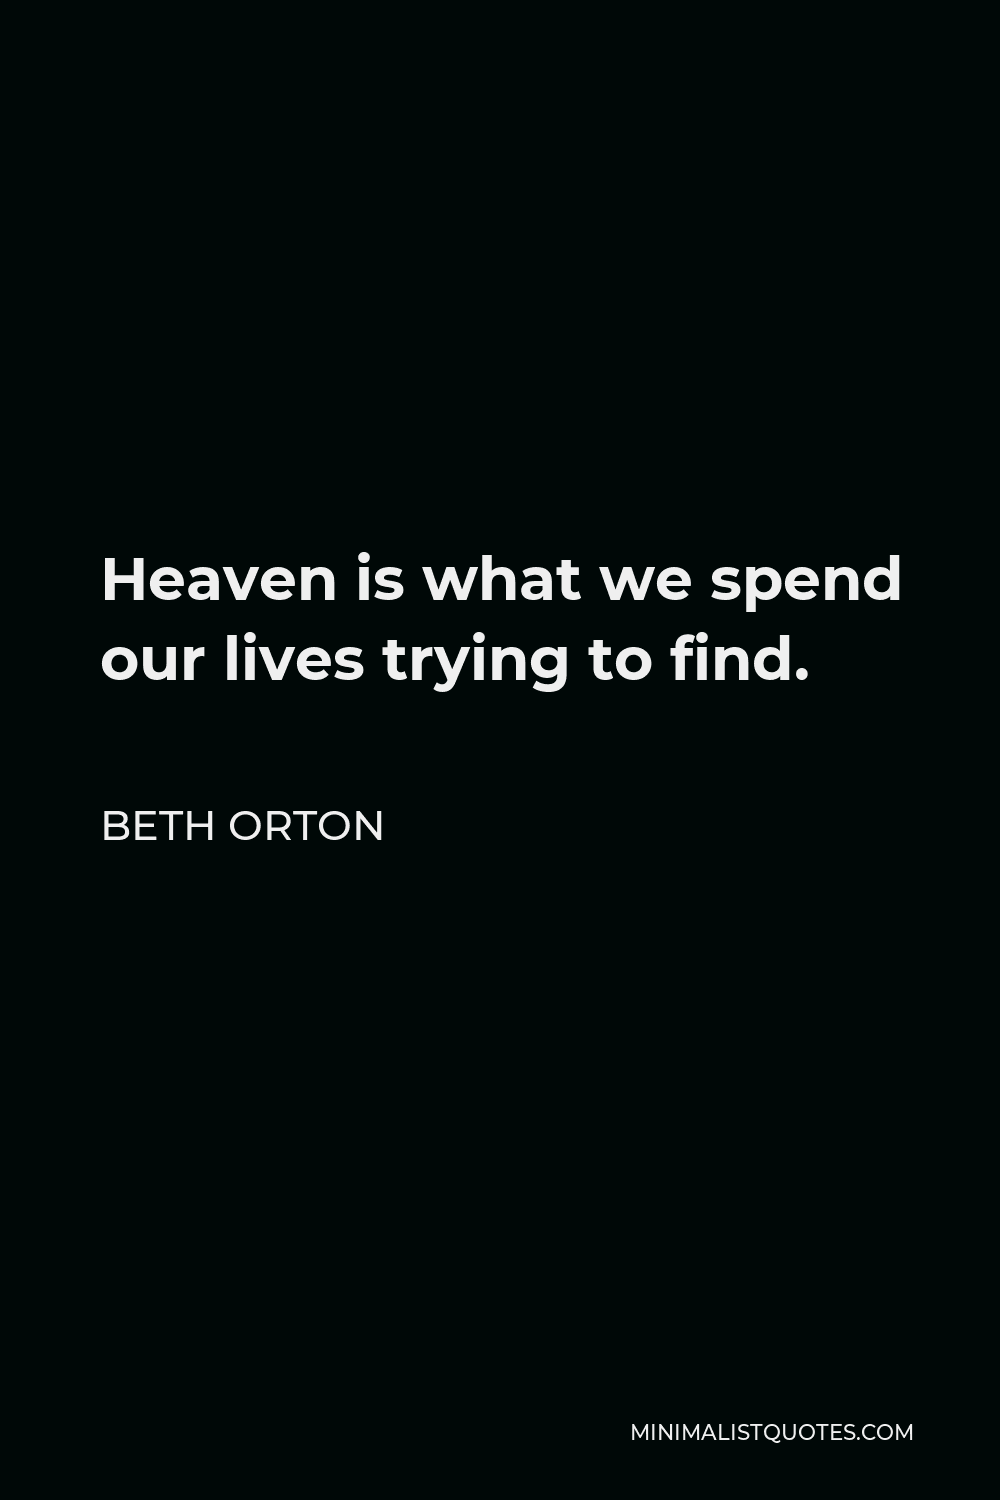 Beth Orton Quote - Heaven is what we spend our lives trying to find.